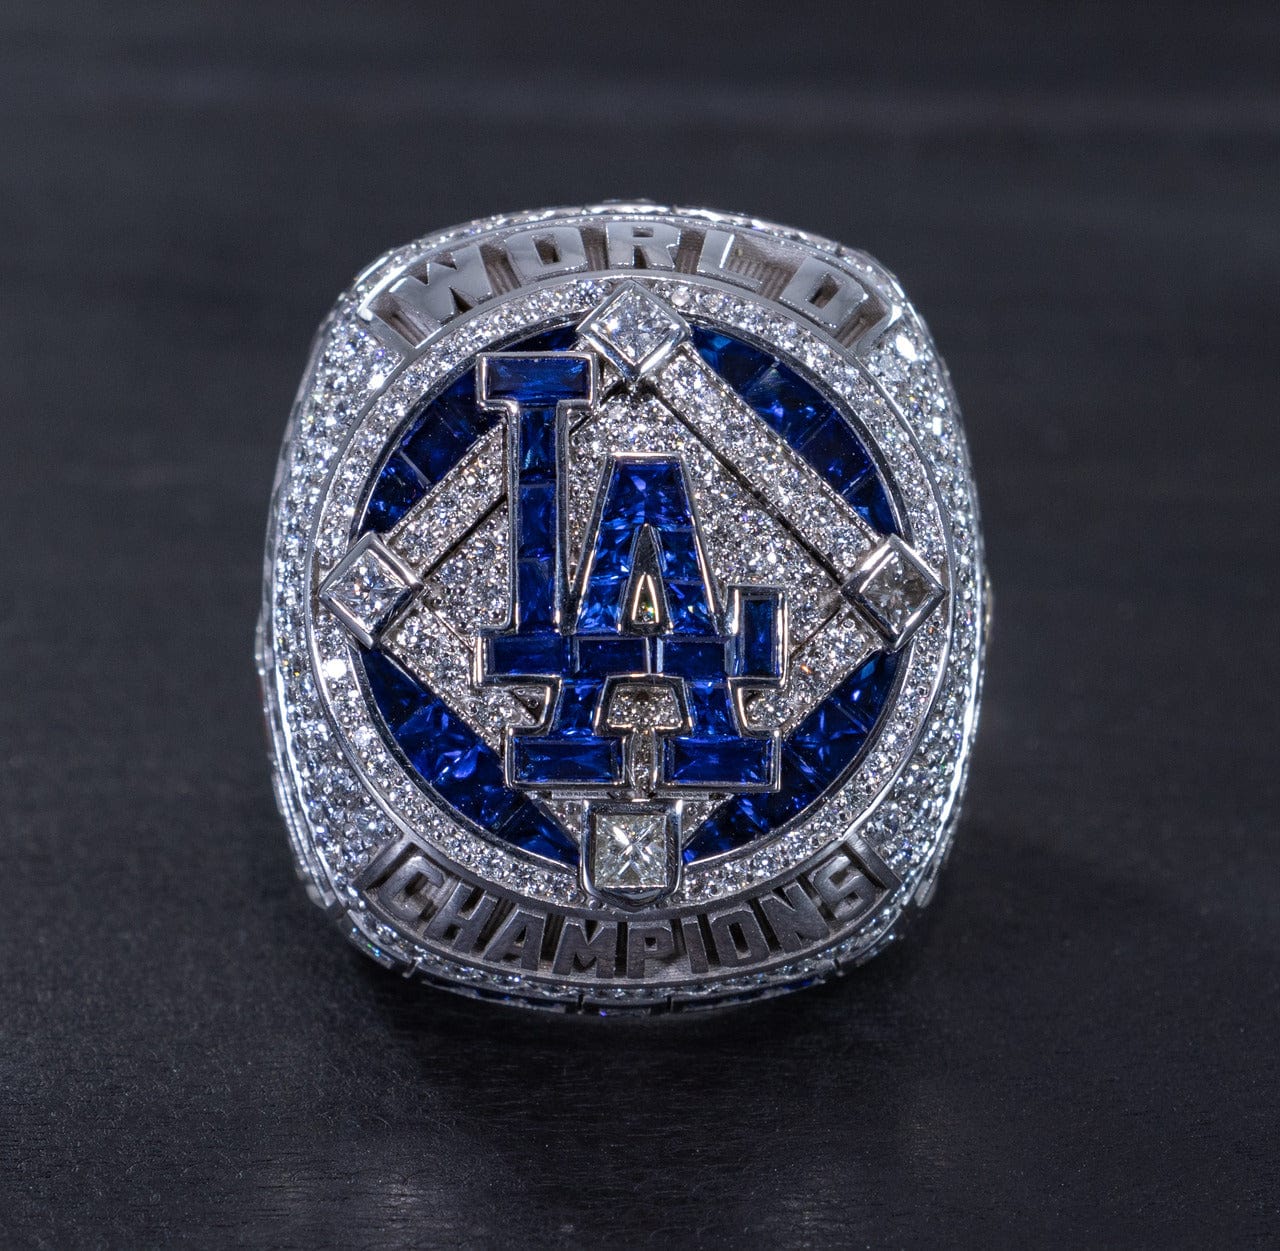 The Story Behind the Dodgers World Series Ring 